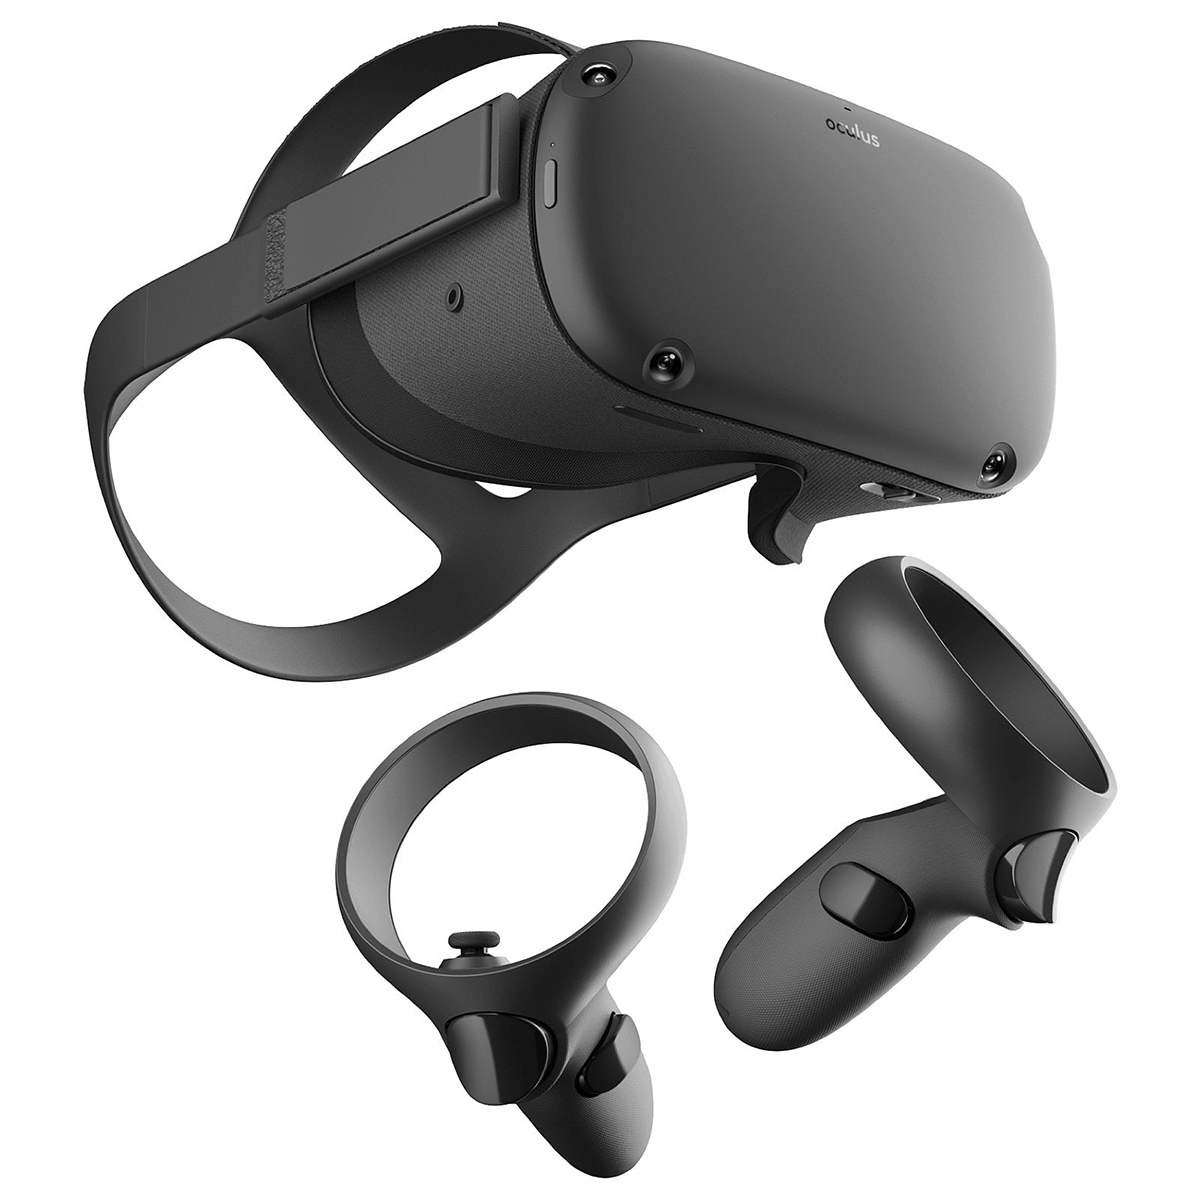 Oculus Rift DK2 VR headset with touch controllers